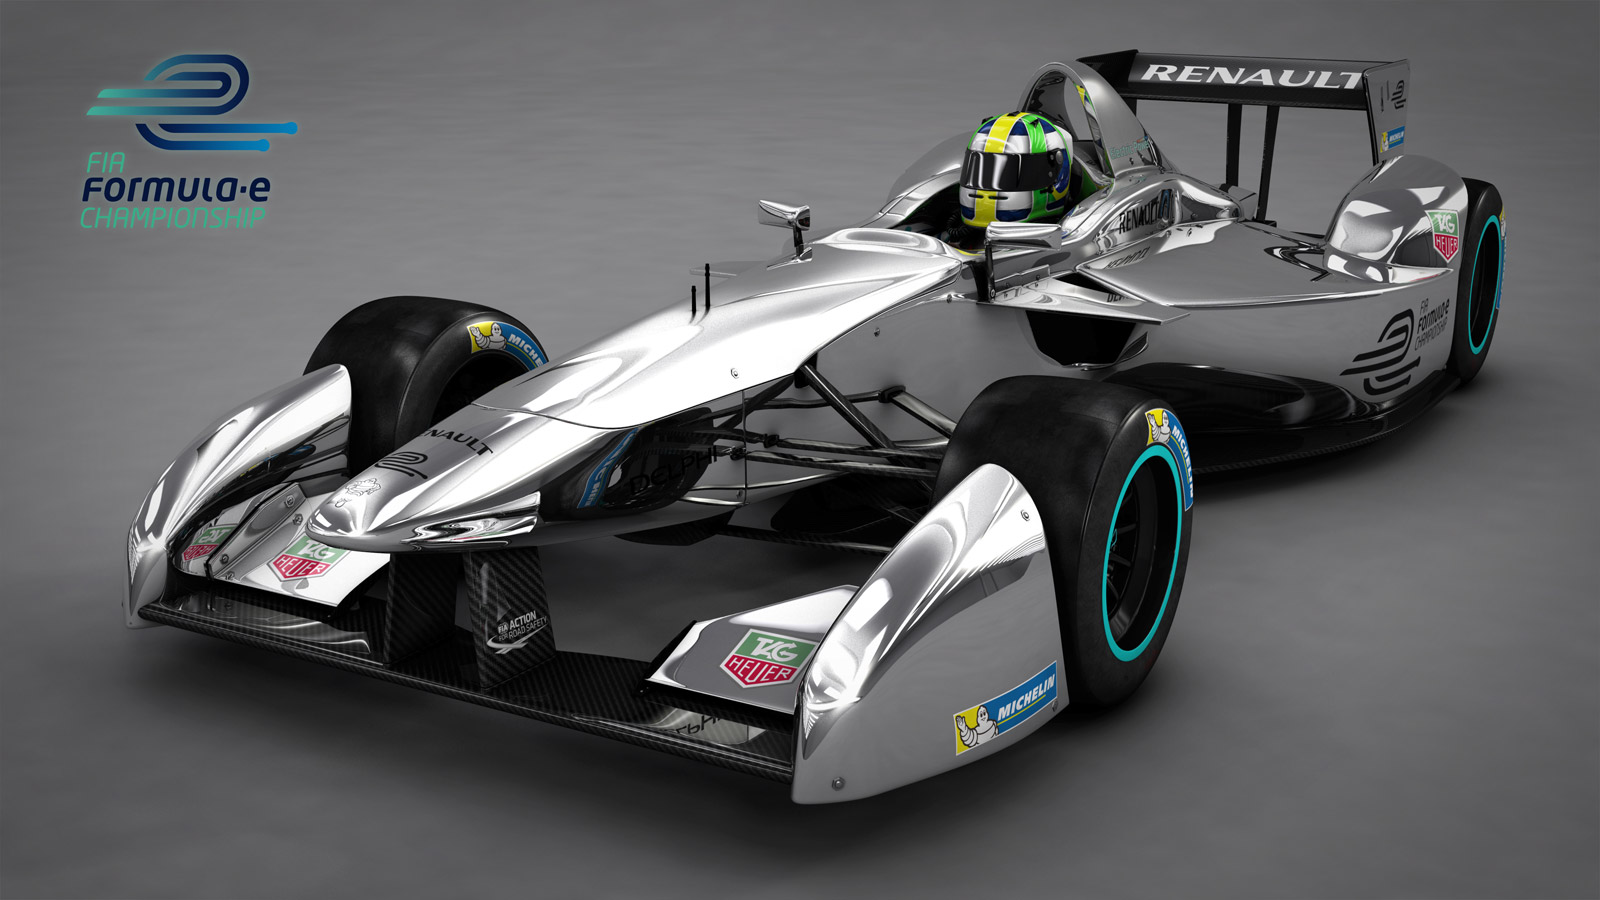 First Formula E Electric Racer To Debut At Frankfurt Auto Show